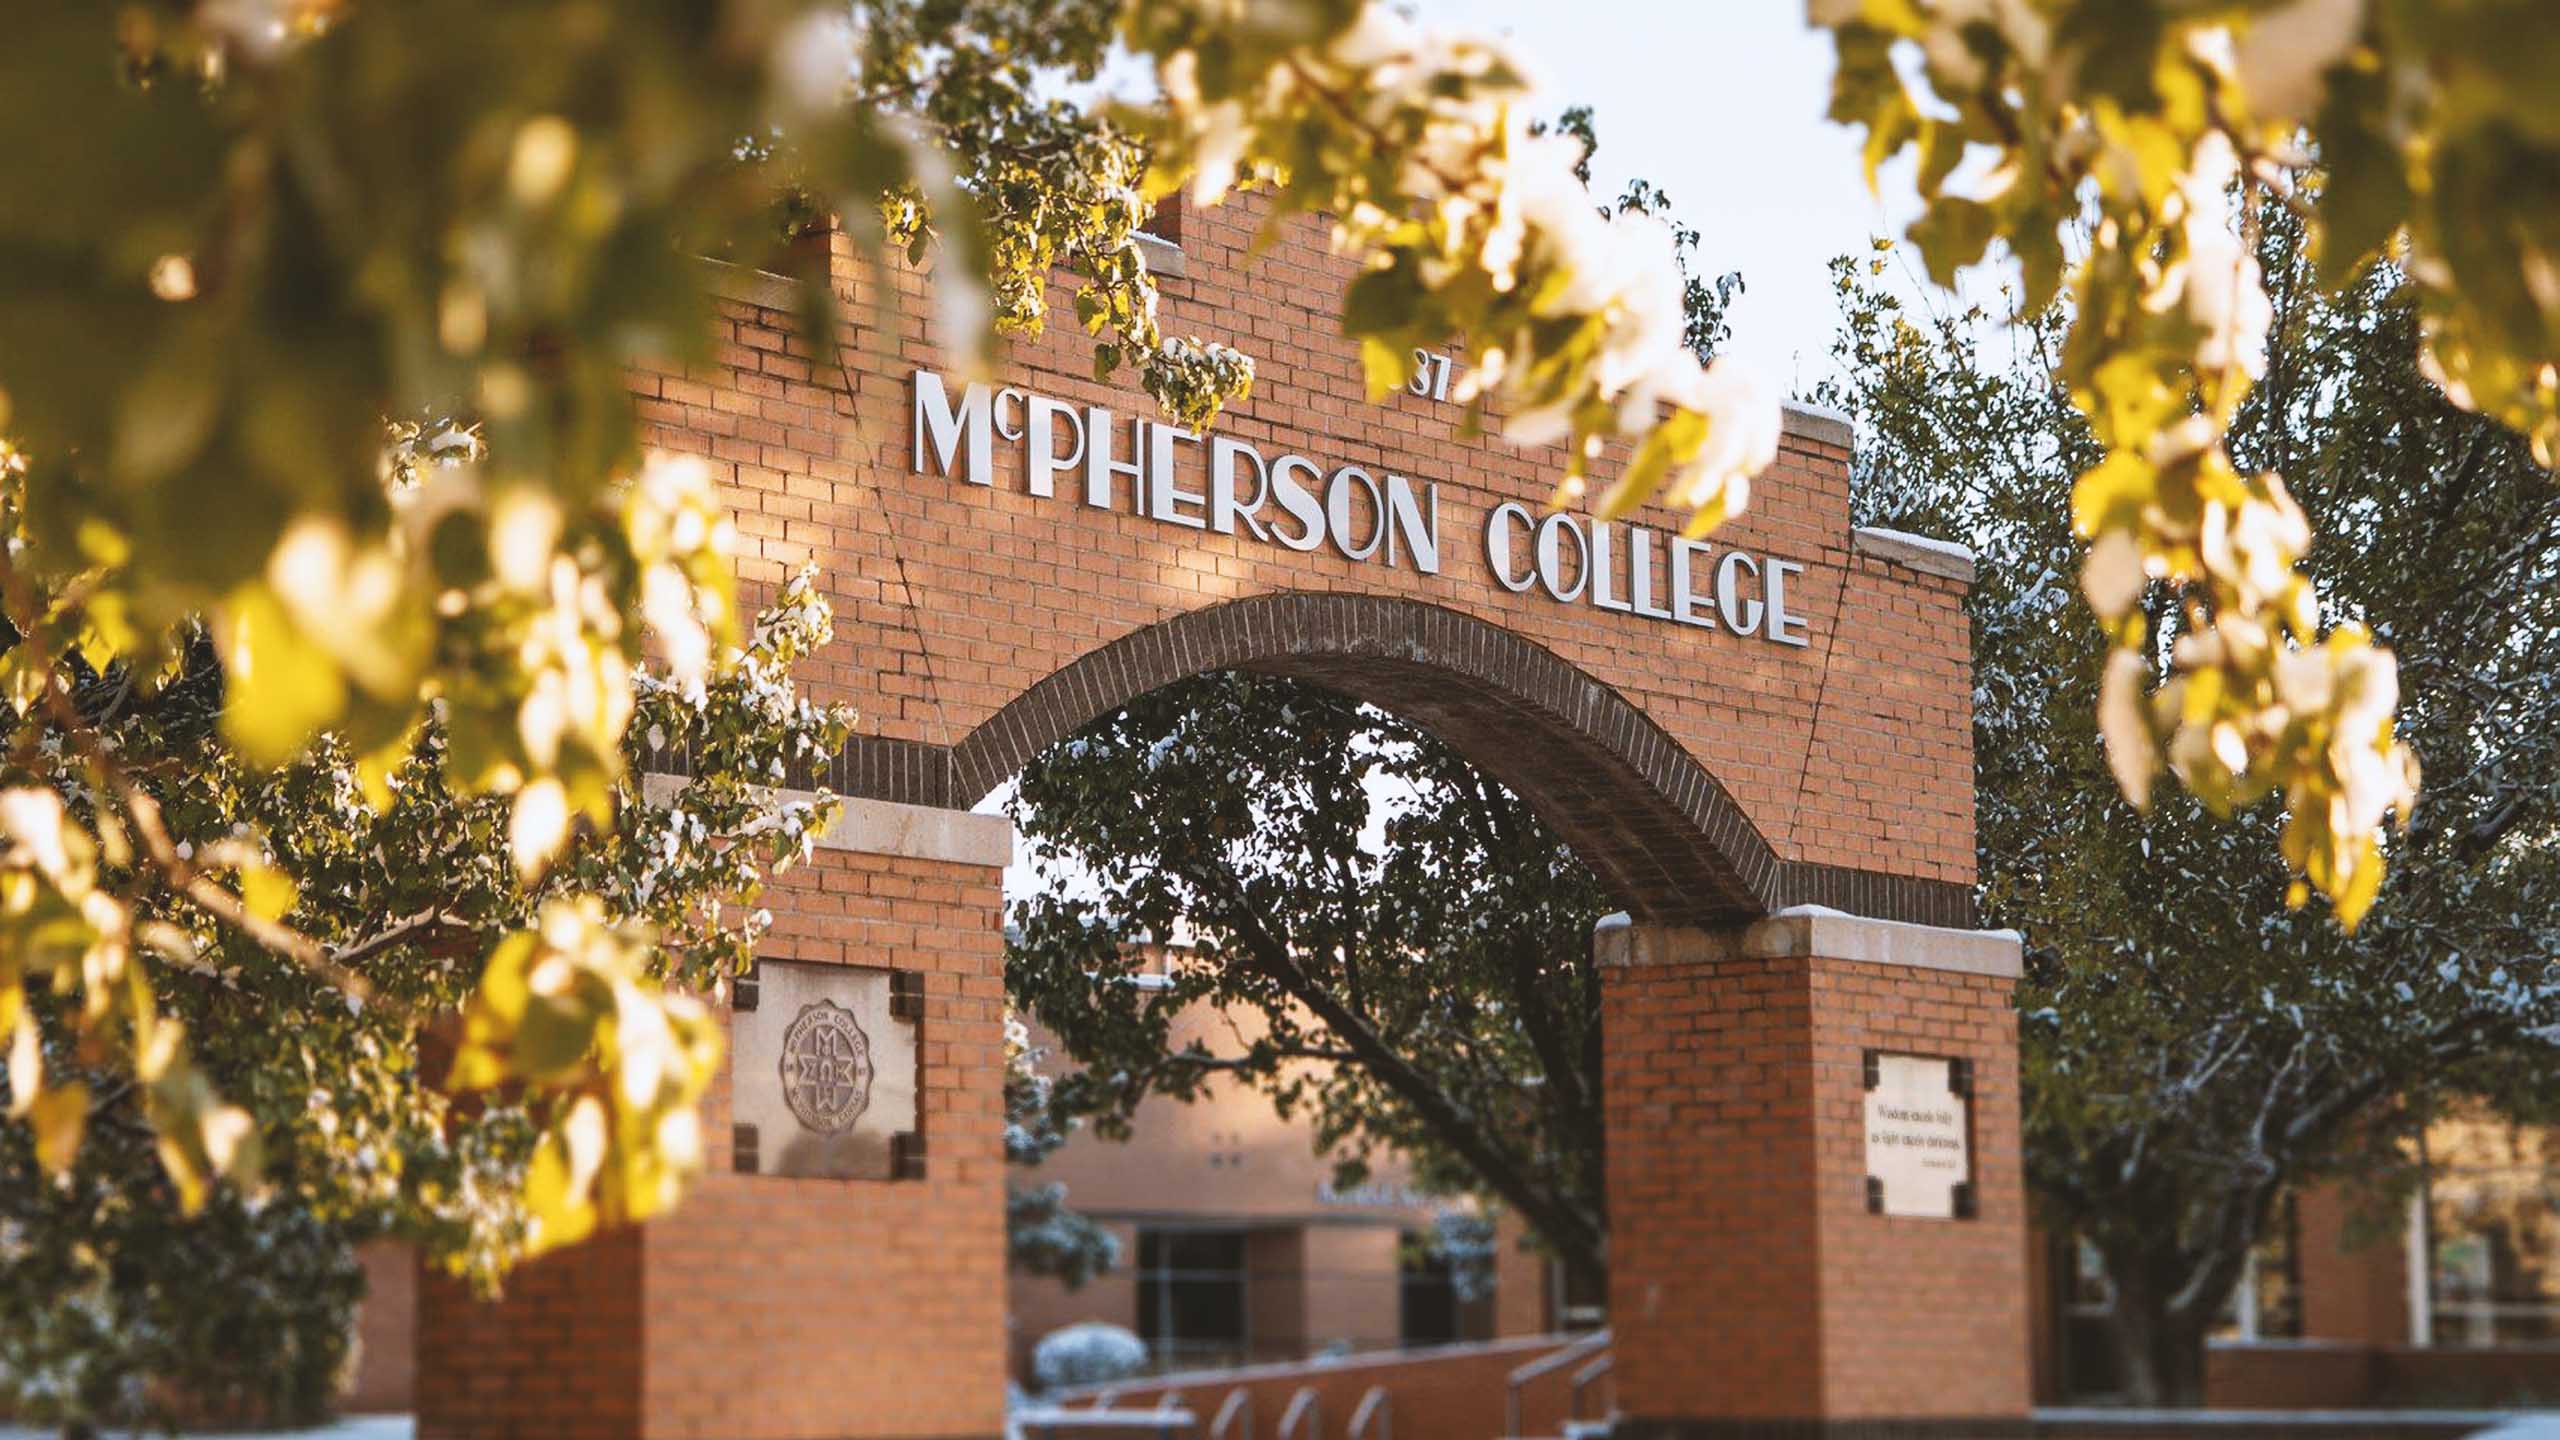 Up&Up welcomes McPherson College to the client family